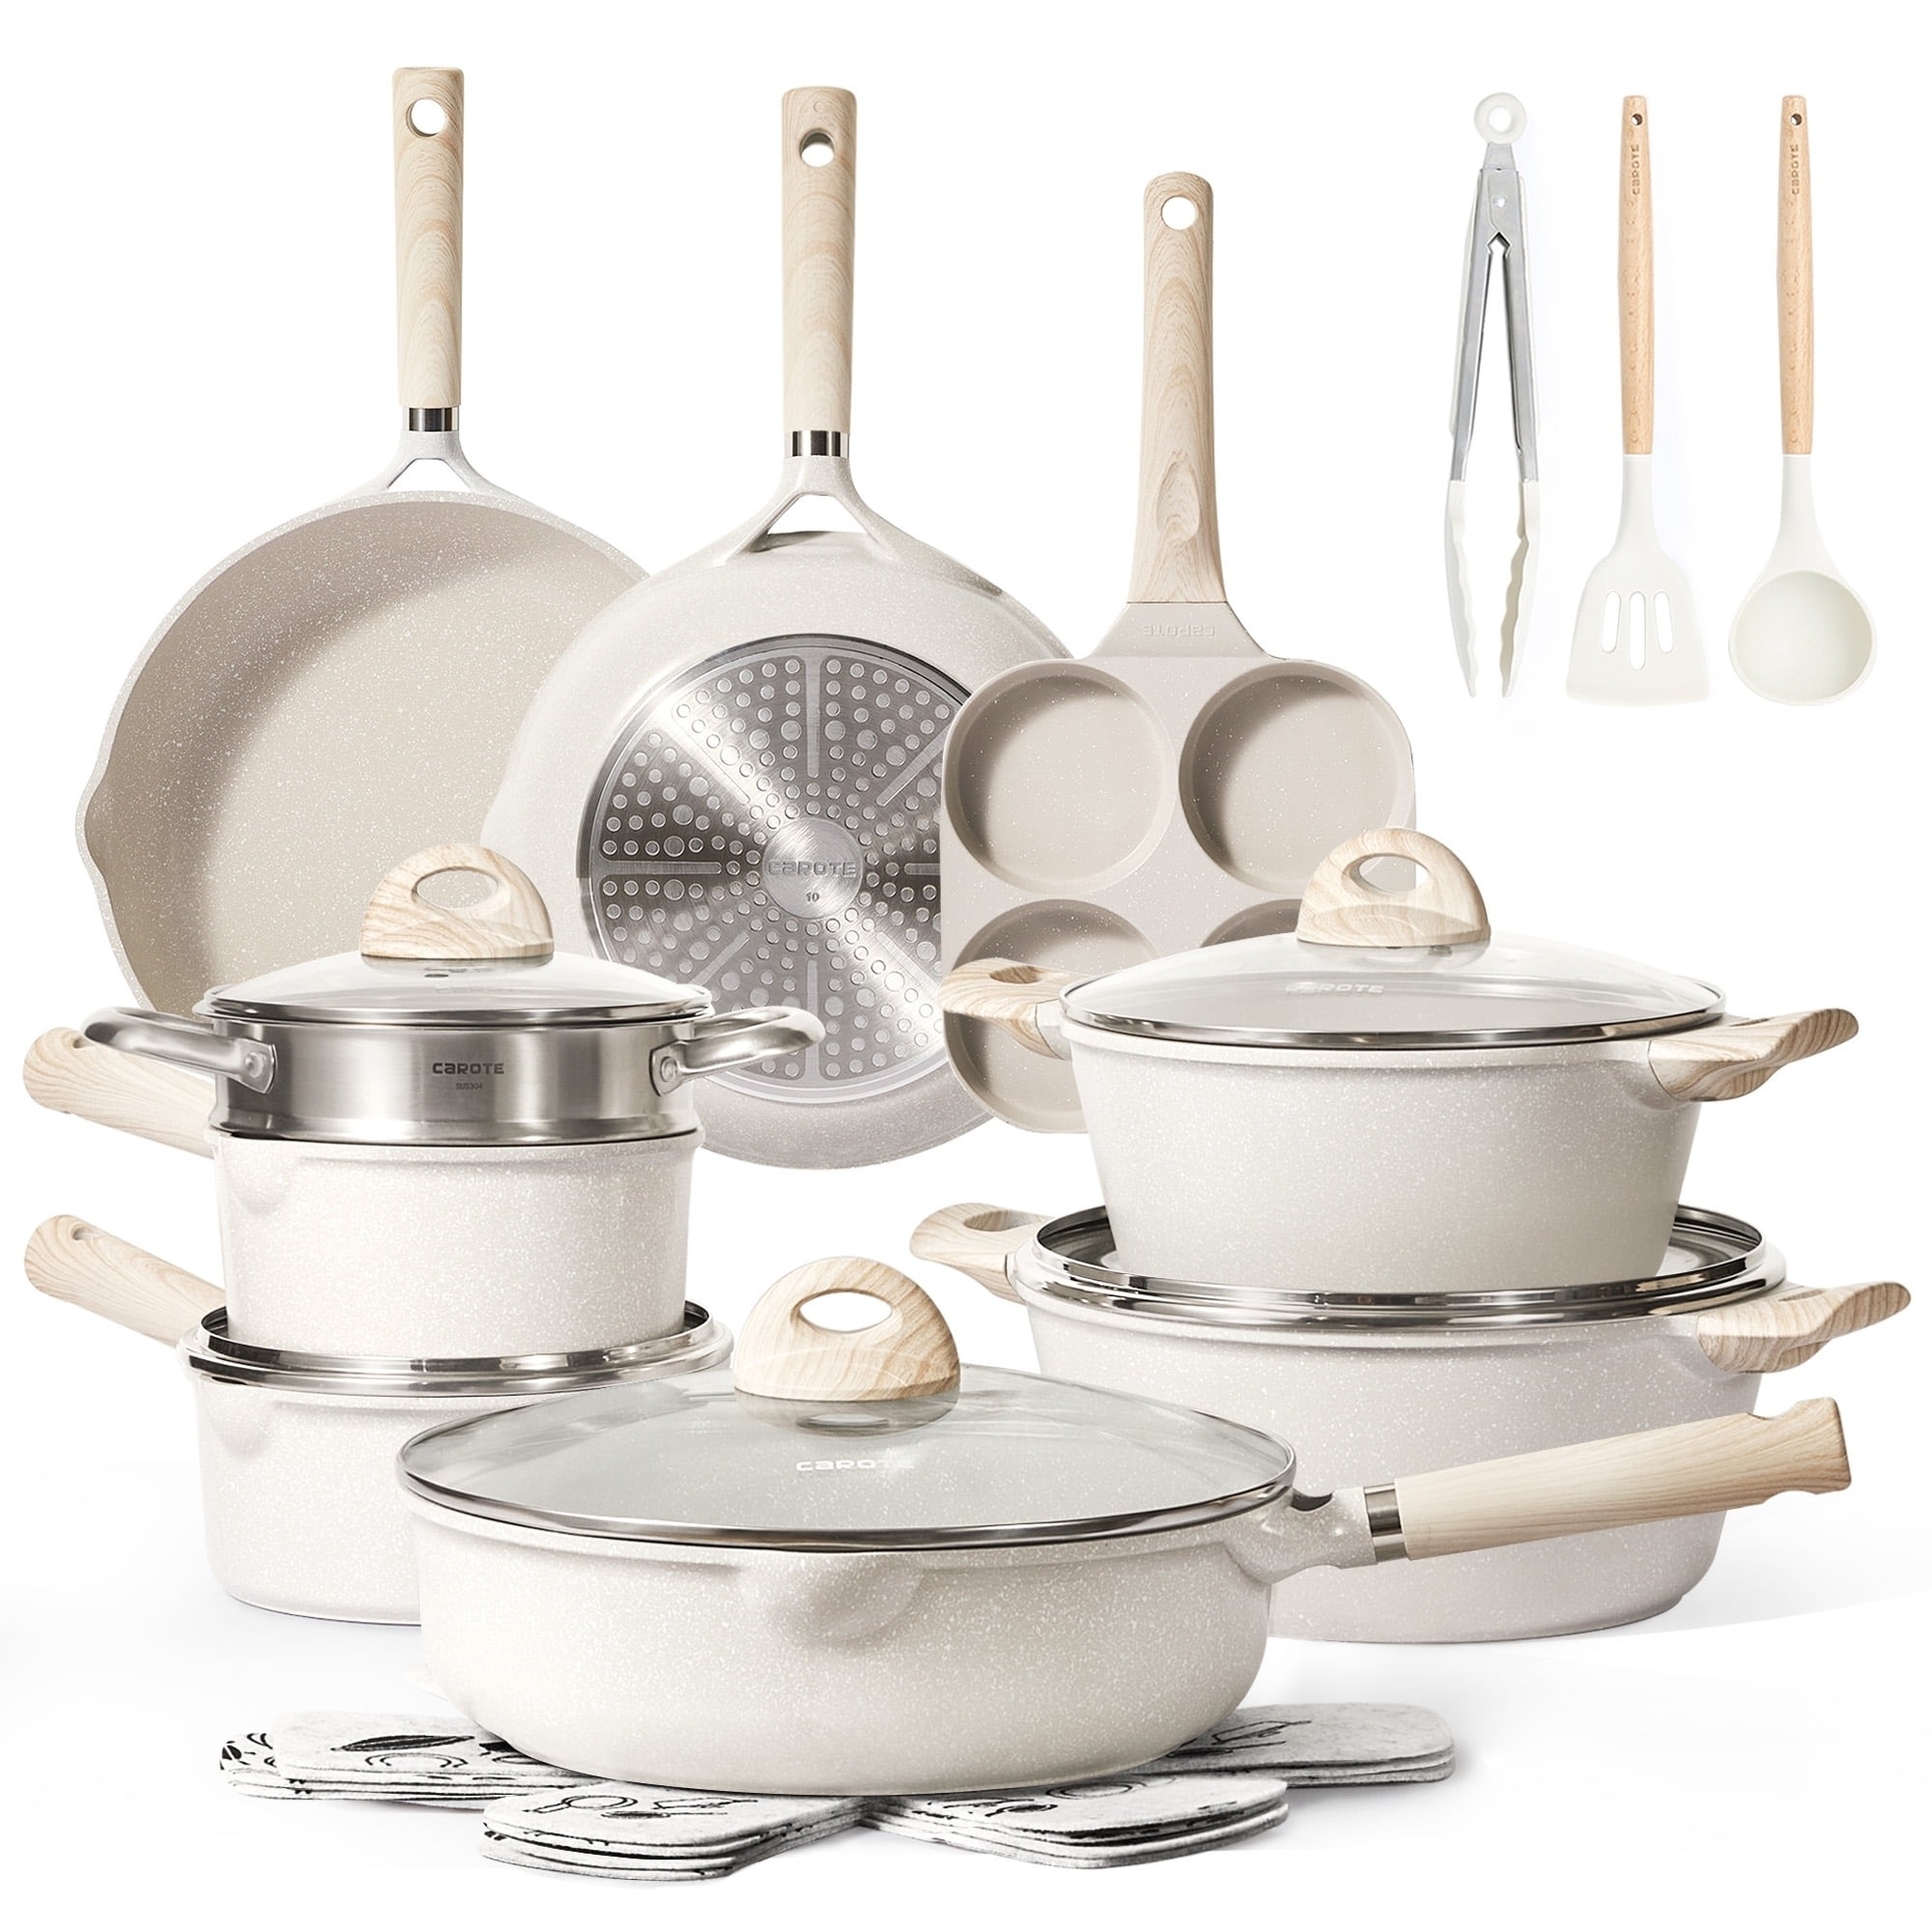 This Highly-Rated Carote Cookware Set Is Over Half Off At Walmart